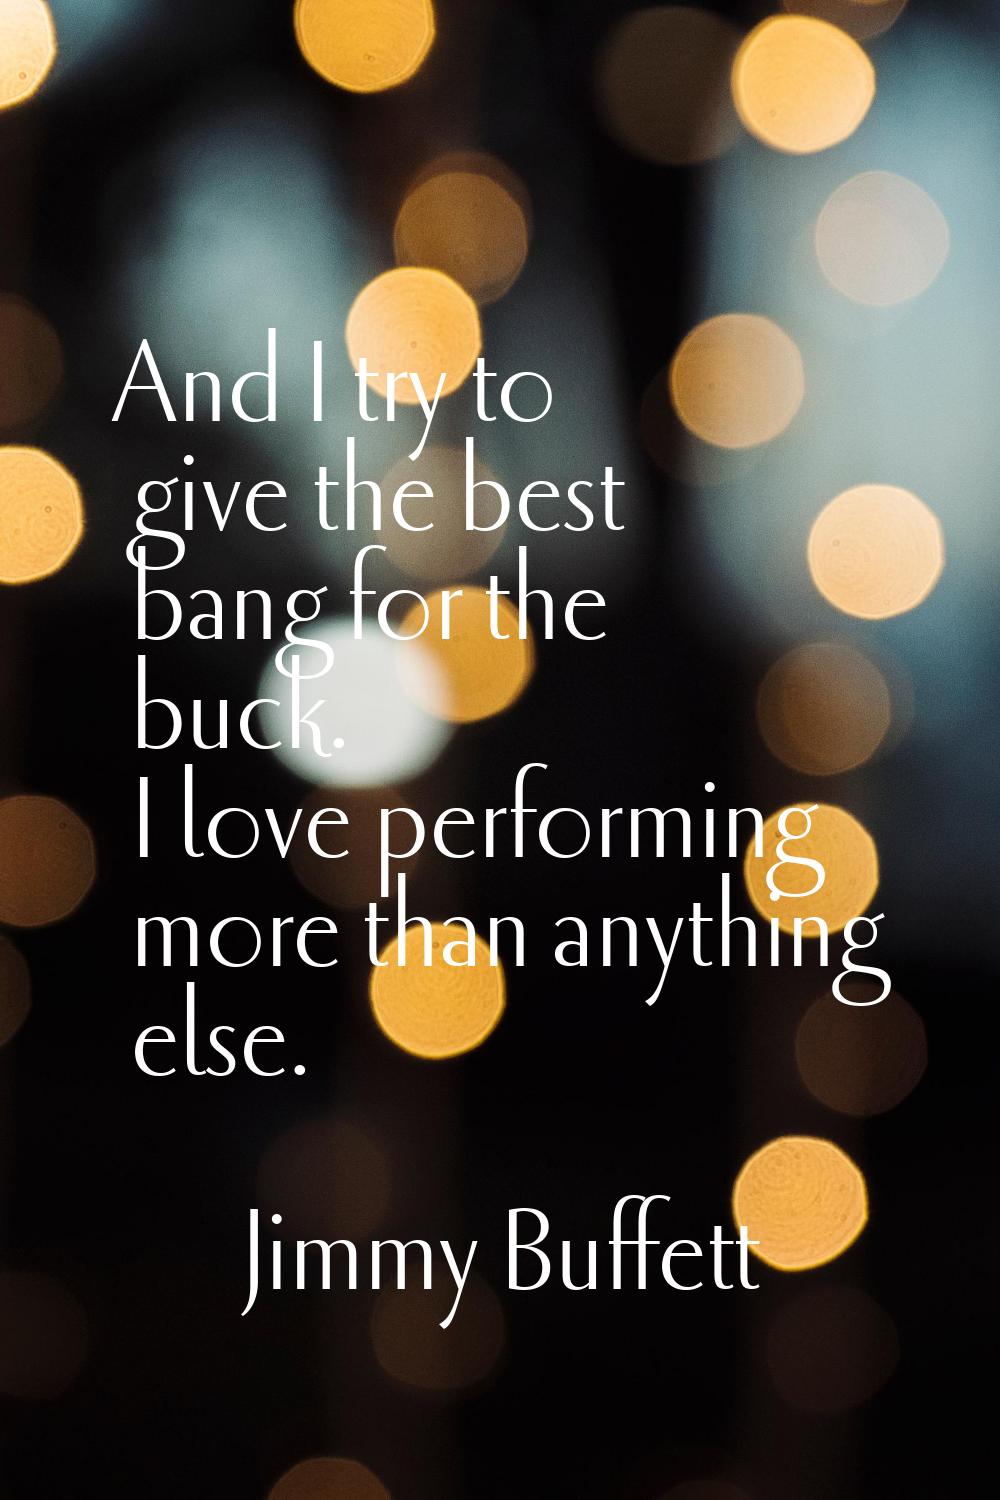 And I try to give the best bang for the buck. I love performing more than anything else.